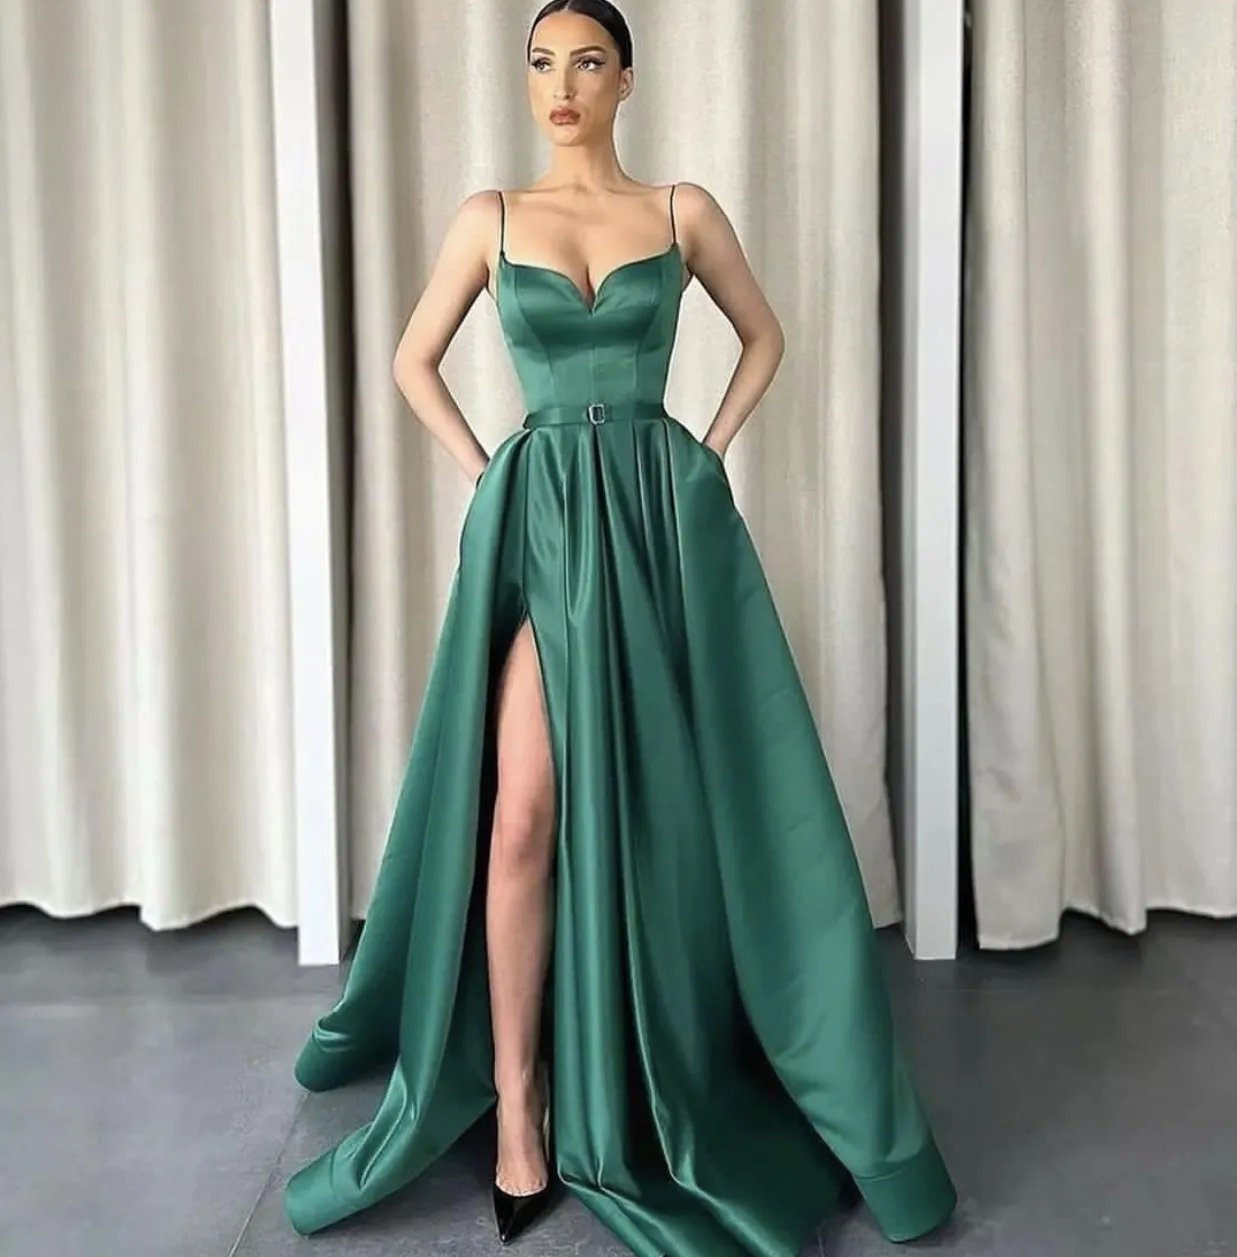 Green Bridesmaid Dresses Wedding Party Guest Gowns A-line Junior Maid of Honor Dress Full Length Side Split266p